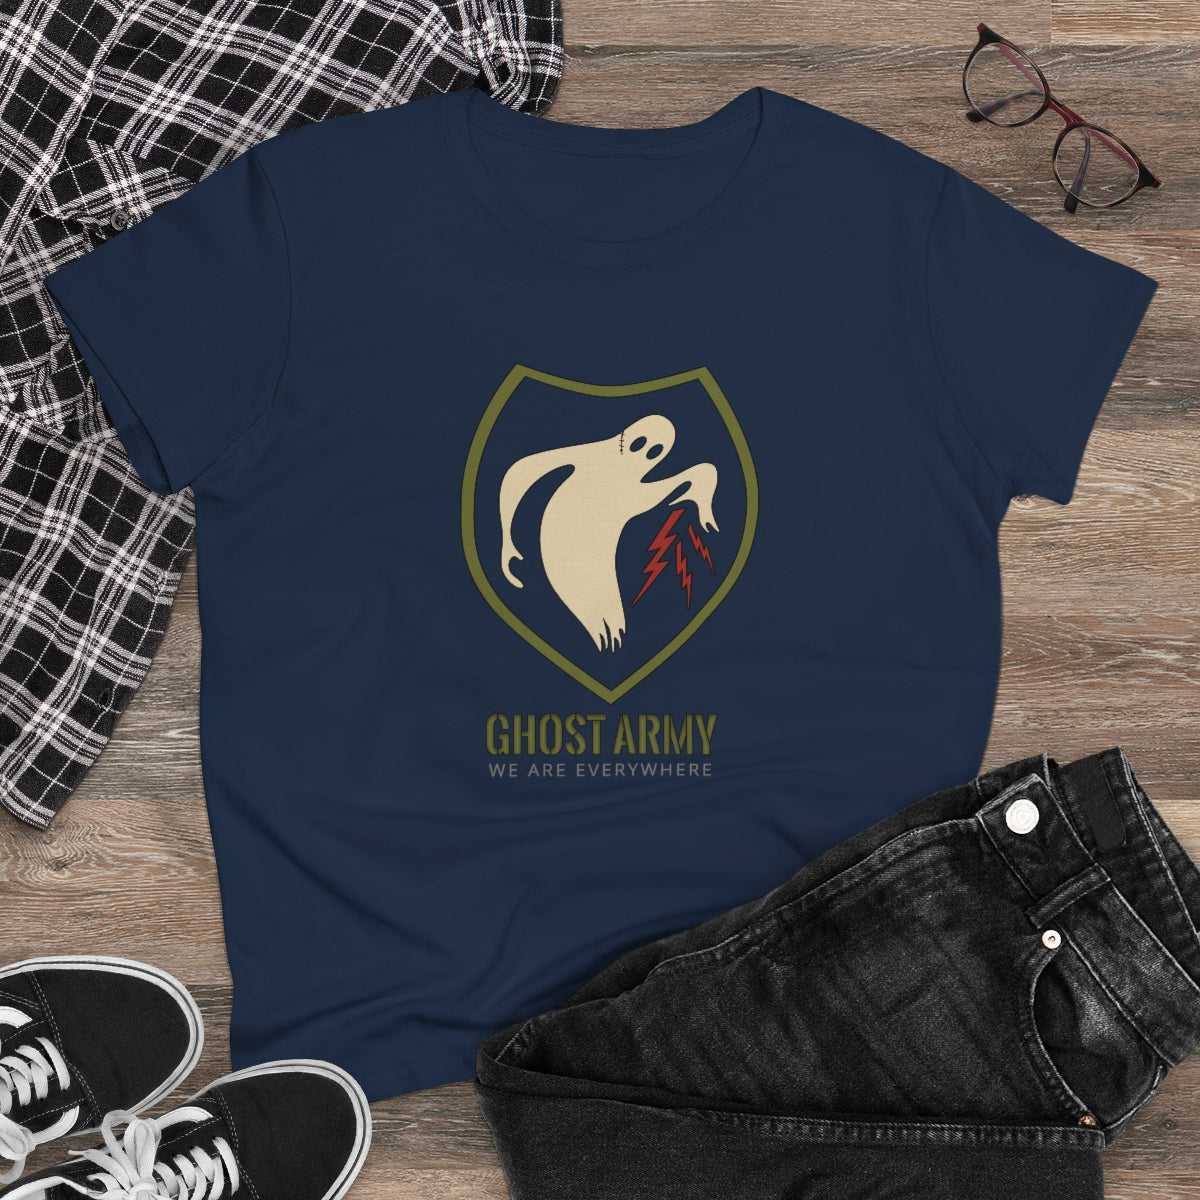 Ghost Army - We Are Everywhere | Women's Tee - Rise of The New Media